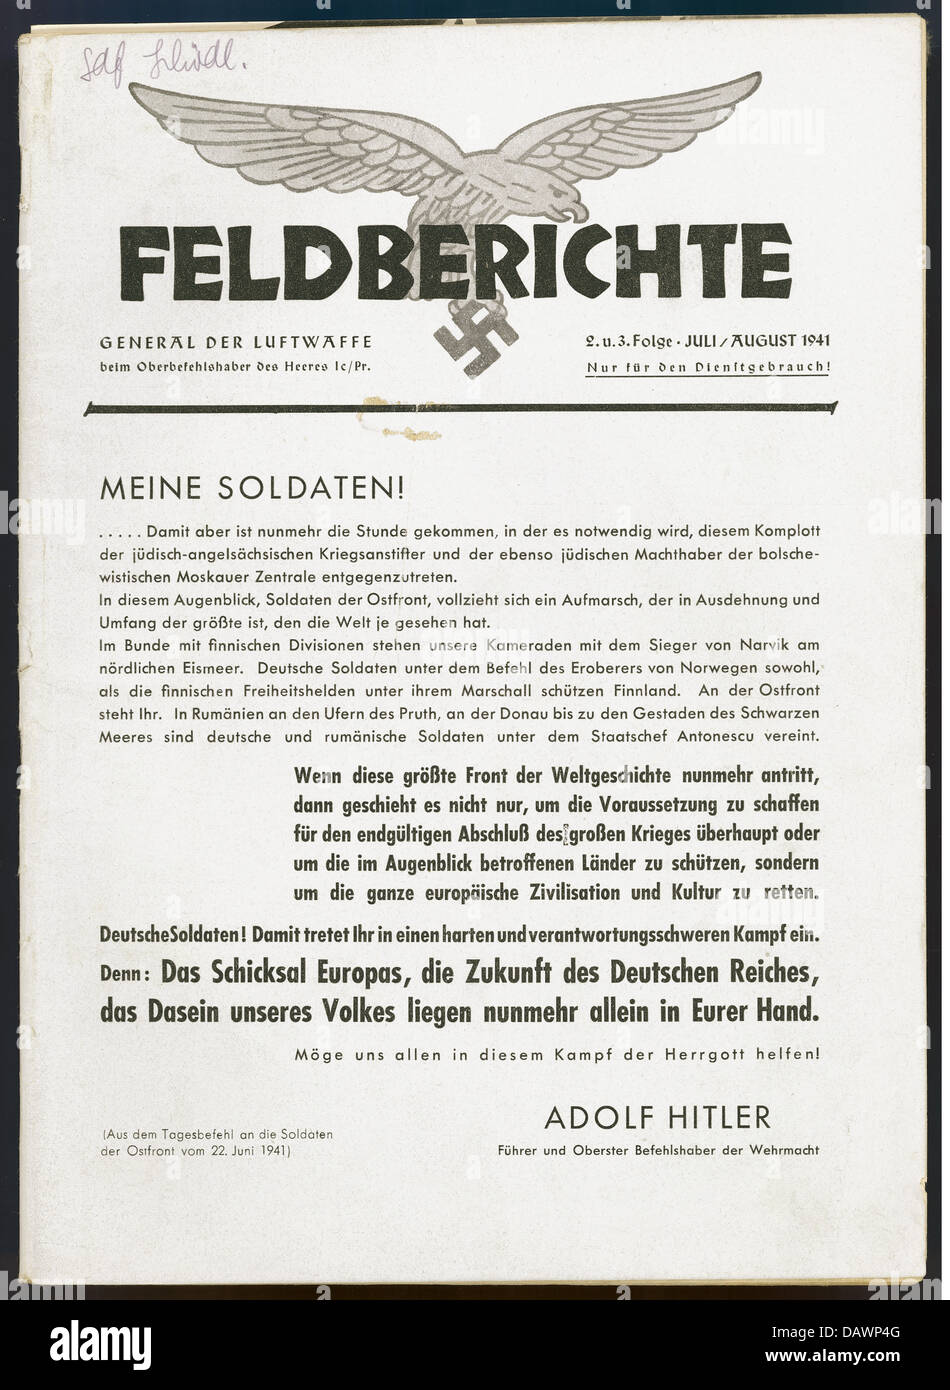 events, Second World War / WWII, propaganda, title page of the Luftwaffe periodical 'Feldberichte, General der Luftwaffe beim Oberbefehlshaber des Heeres', July/August 1941, with an excerpt from an order of the day by Adolf Hitler to the soldiers of the Eastern Front from 22.6.1941, Additional-Rights-Clearences-Not Available Stock Photo